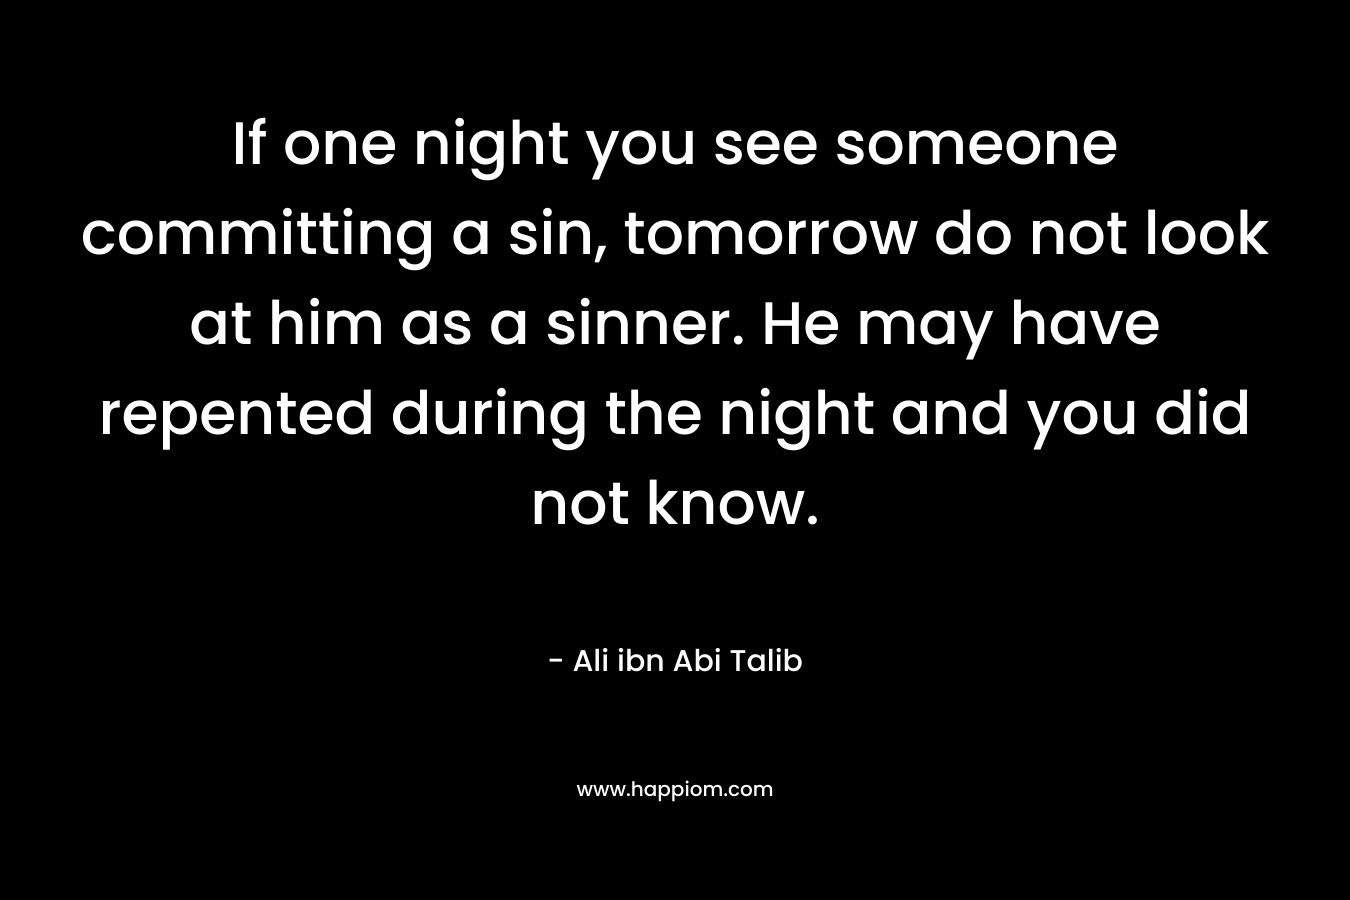 If one night you see someone committing a sin, tomorrow do not look at him as a sinner. He may have repented during the night and you did not know. – Ali ibn Abi Talib